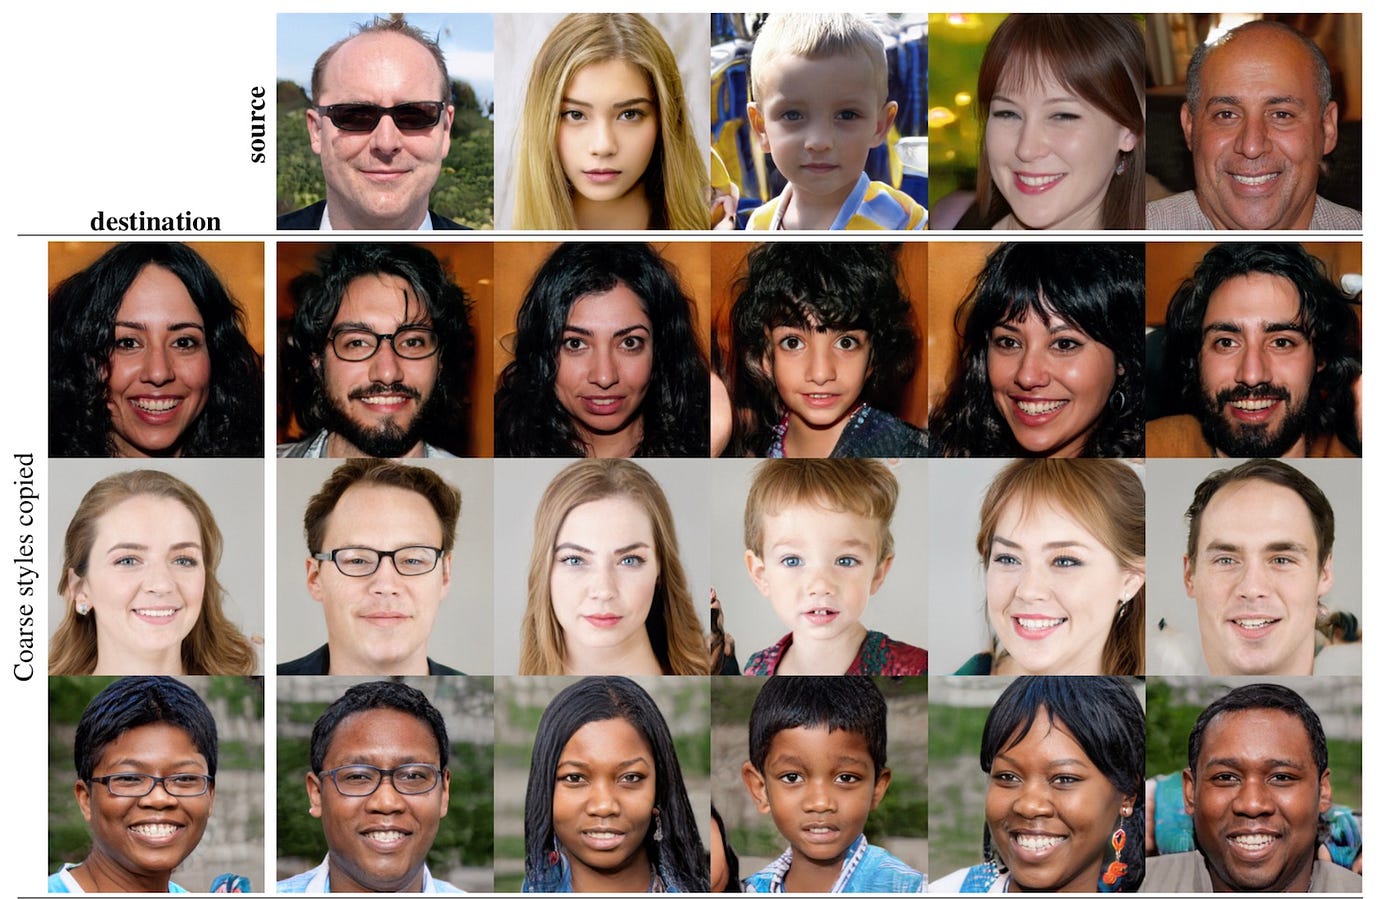 Explained: A Style-Based Generator Architecture for GANs - Generating and Tuning Realistic Artificial Faces | Rani Horev | Towards Data Science